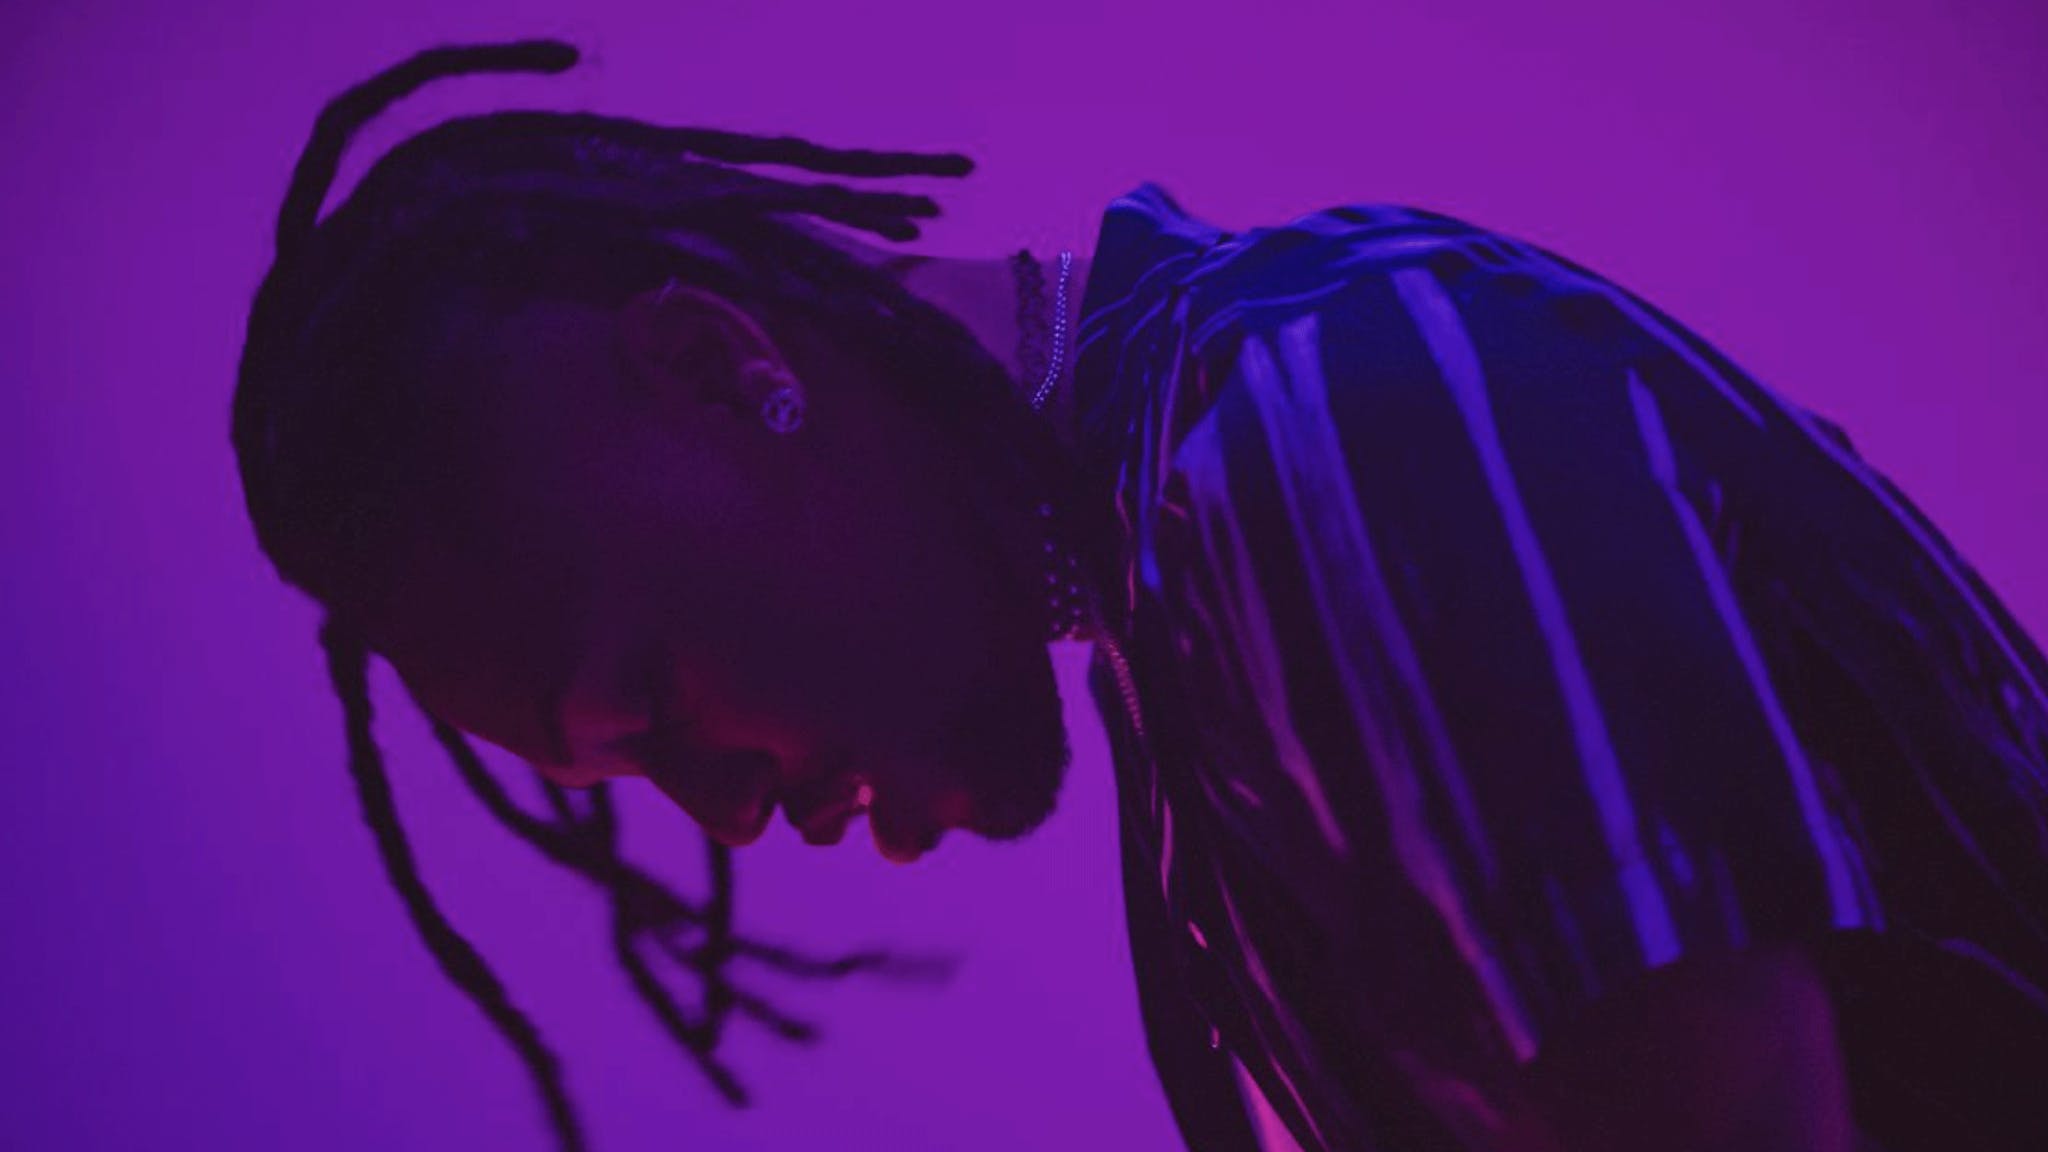 Travis Scott wearing a black and white striped shirt in front of a purple background - 2048x1152